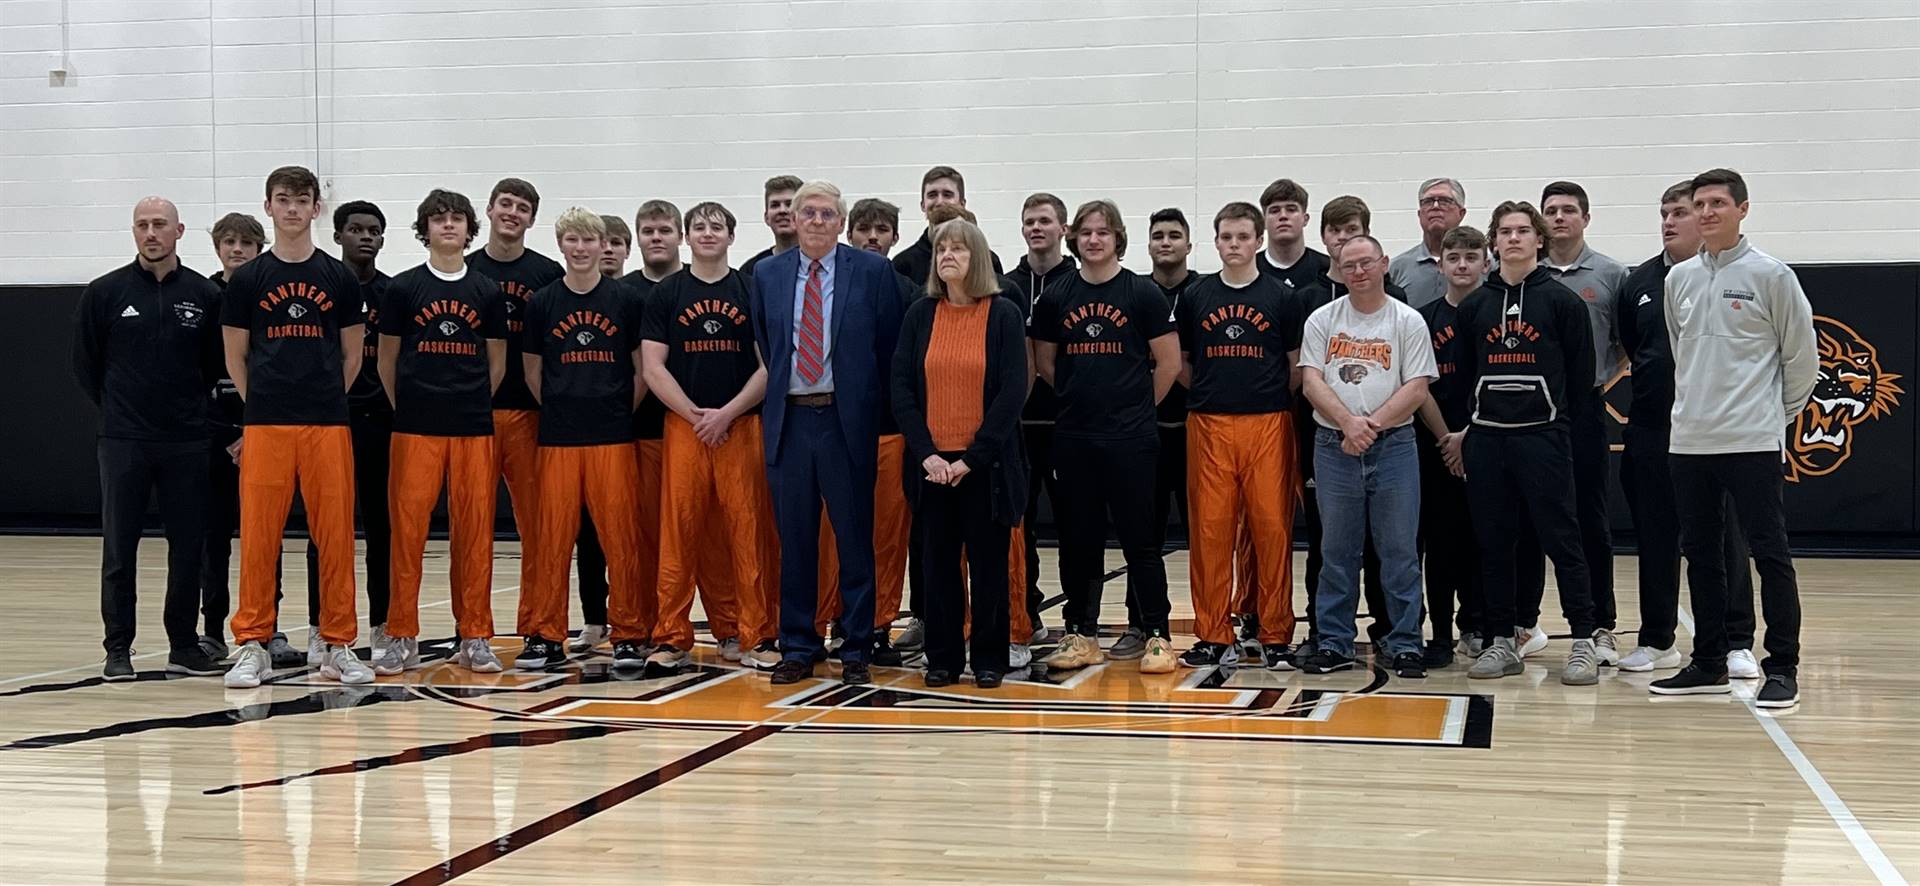 Dedication of Renovated Gymnasium at our "Throwback Game"